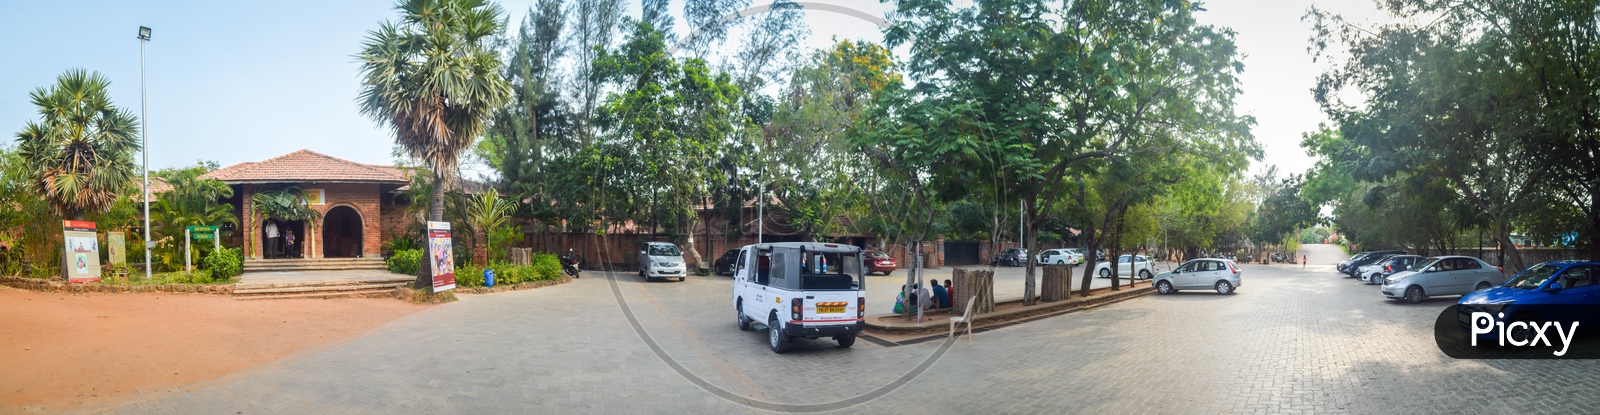 Car parking and entrance to Dakshina Chitra Museum